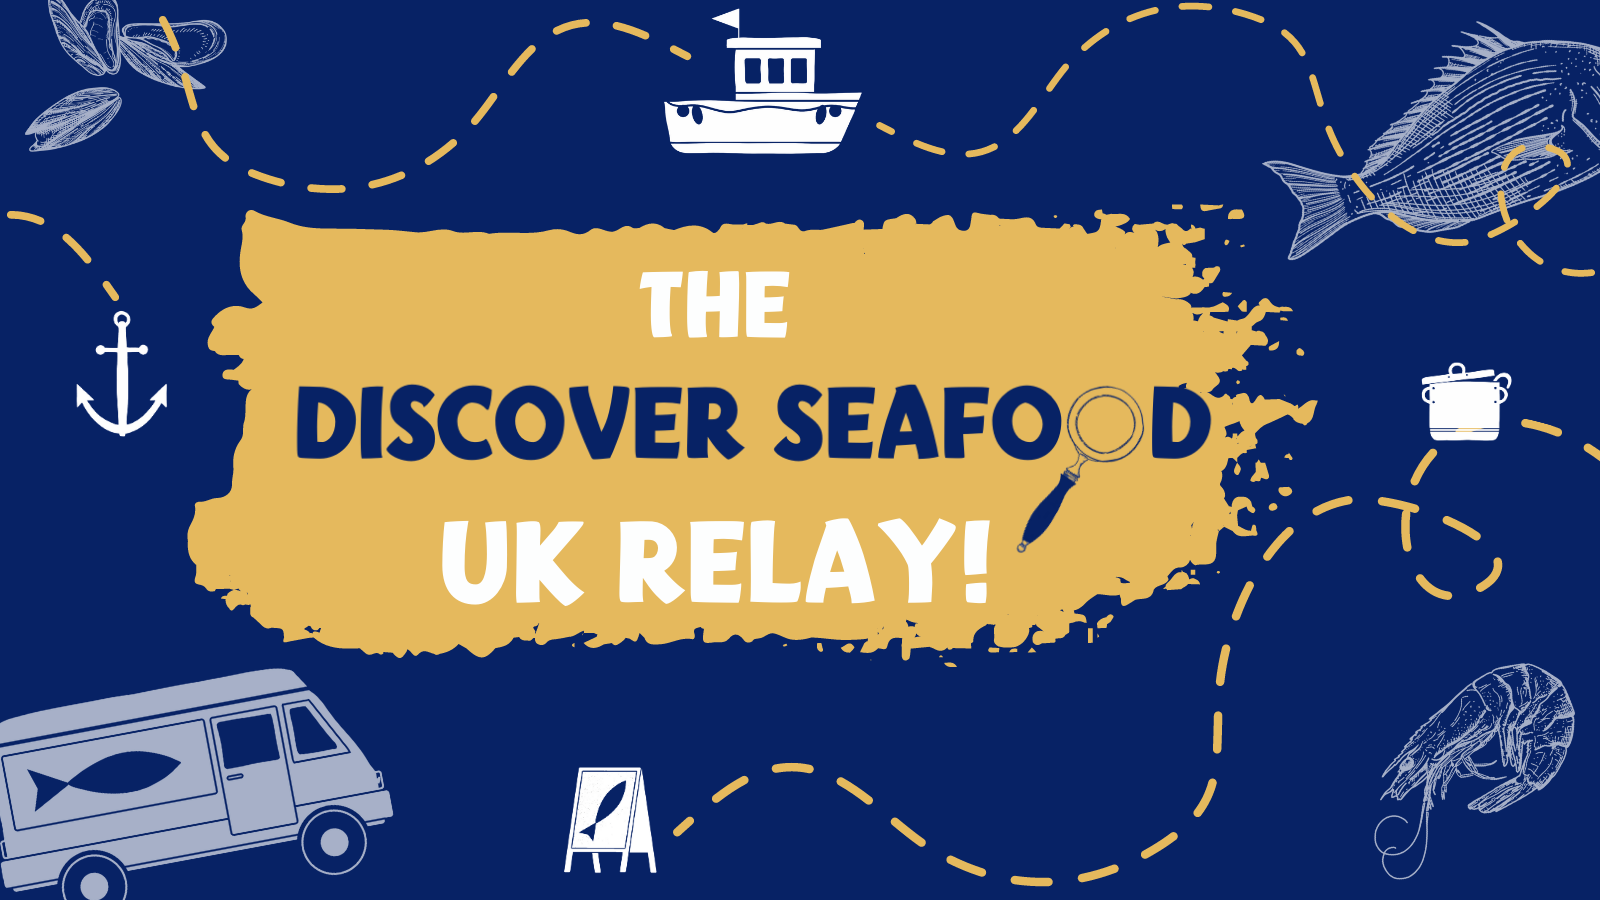 Launching the Discover Seafood UK Relay